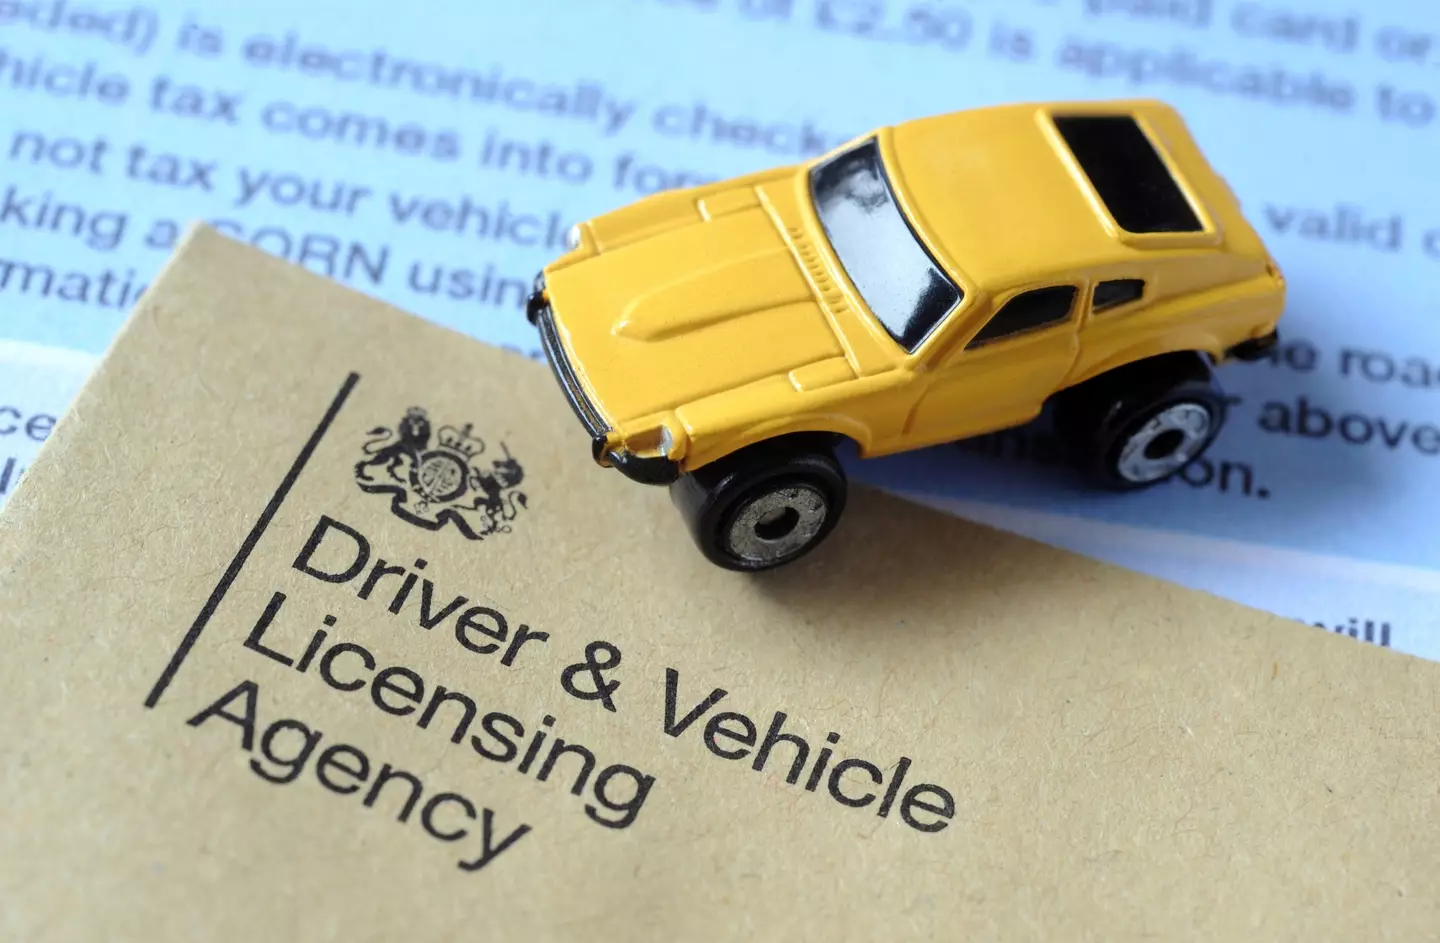 Many motorists are struggling to make contact with the DVLA (